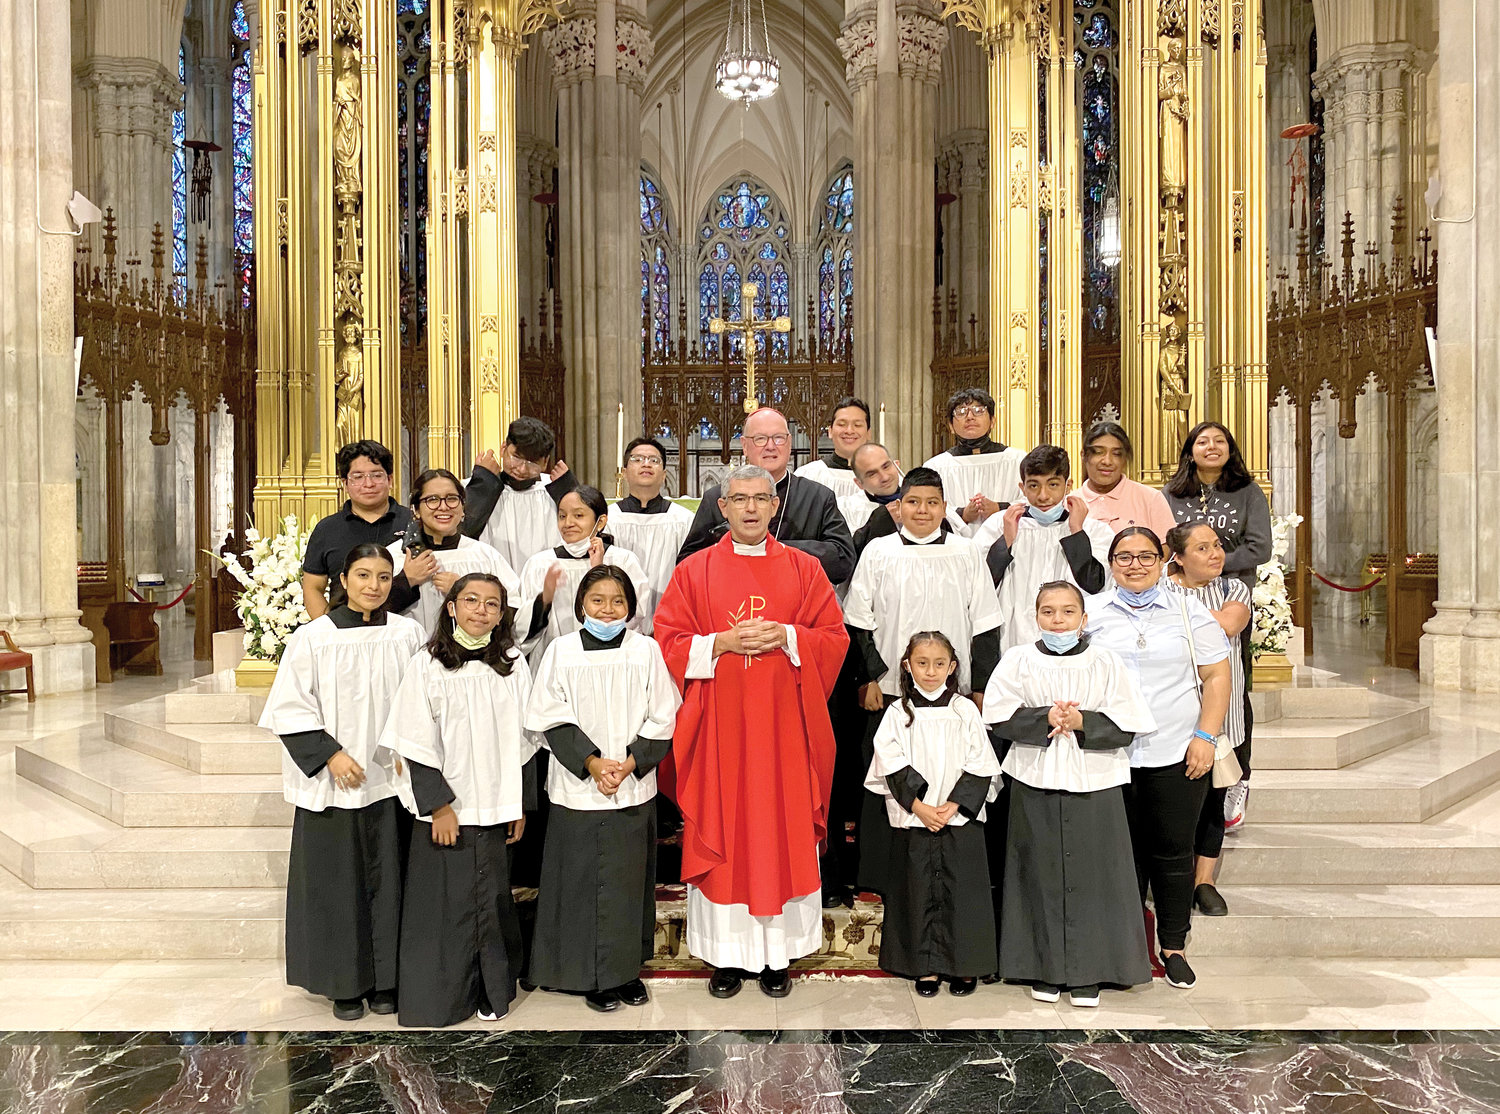 Altar servers from Our Lady of Mount Carmel parish in the Bronx join their pastor, Father Jose Felix Ortega, and Cardinal Dolan after the noon Mass at St. Patrick’s Cathedral Aug. 9, the feast of St. Edith Stein, a Carmelite known as St. Teresa Benedicta of the Cross. Also concelebrating was Father Donald Haggerty of the cathedral staff.